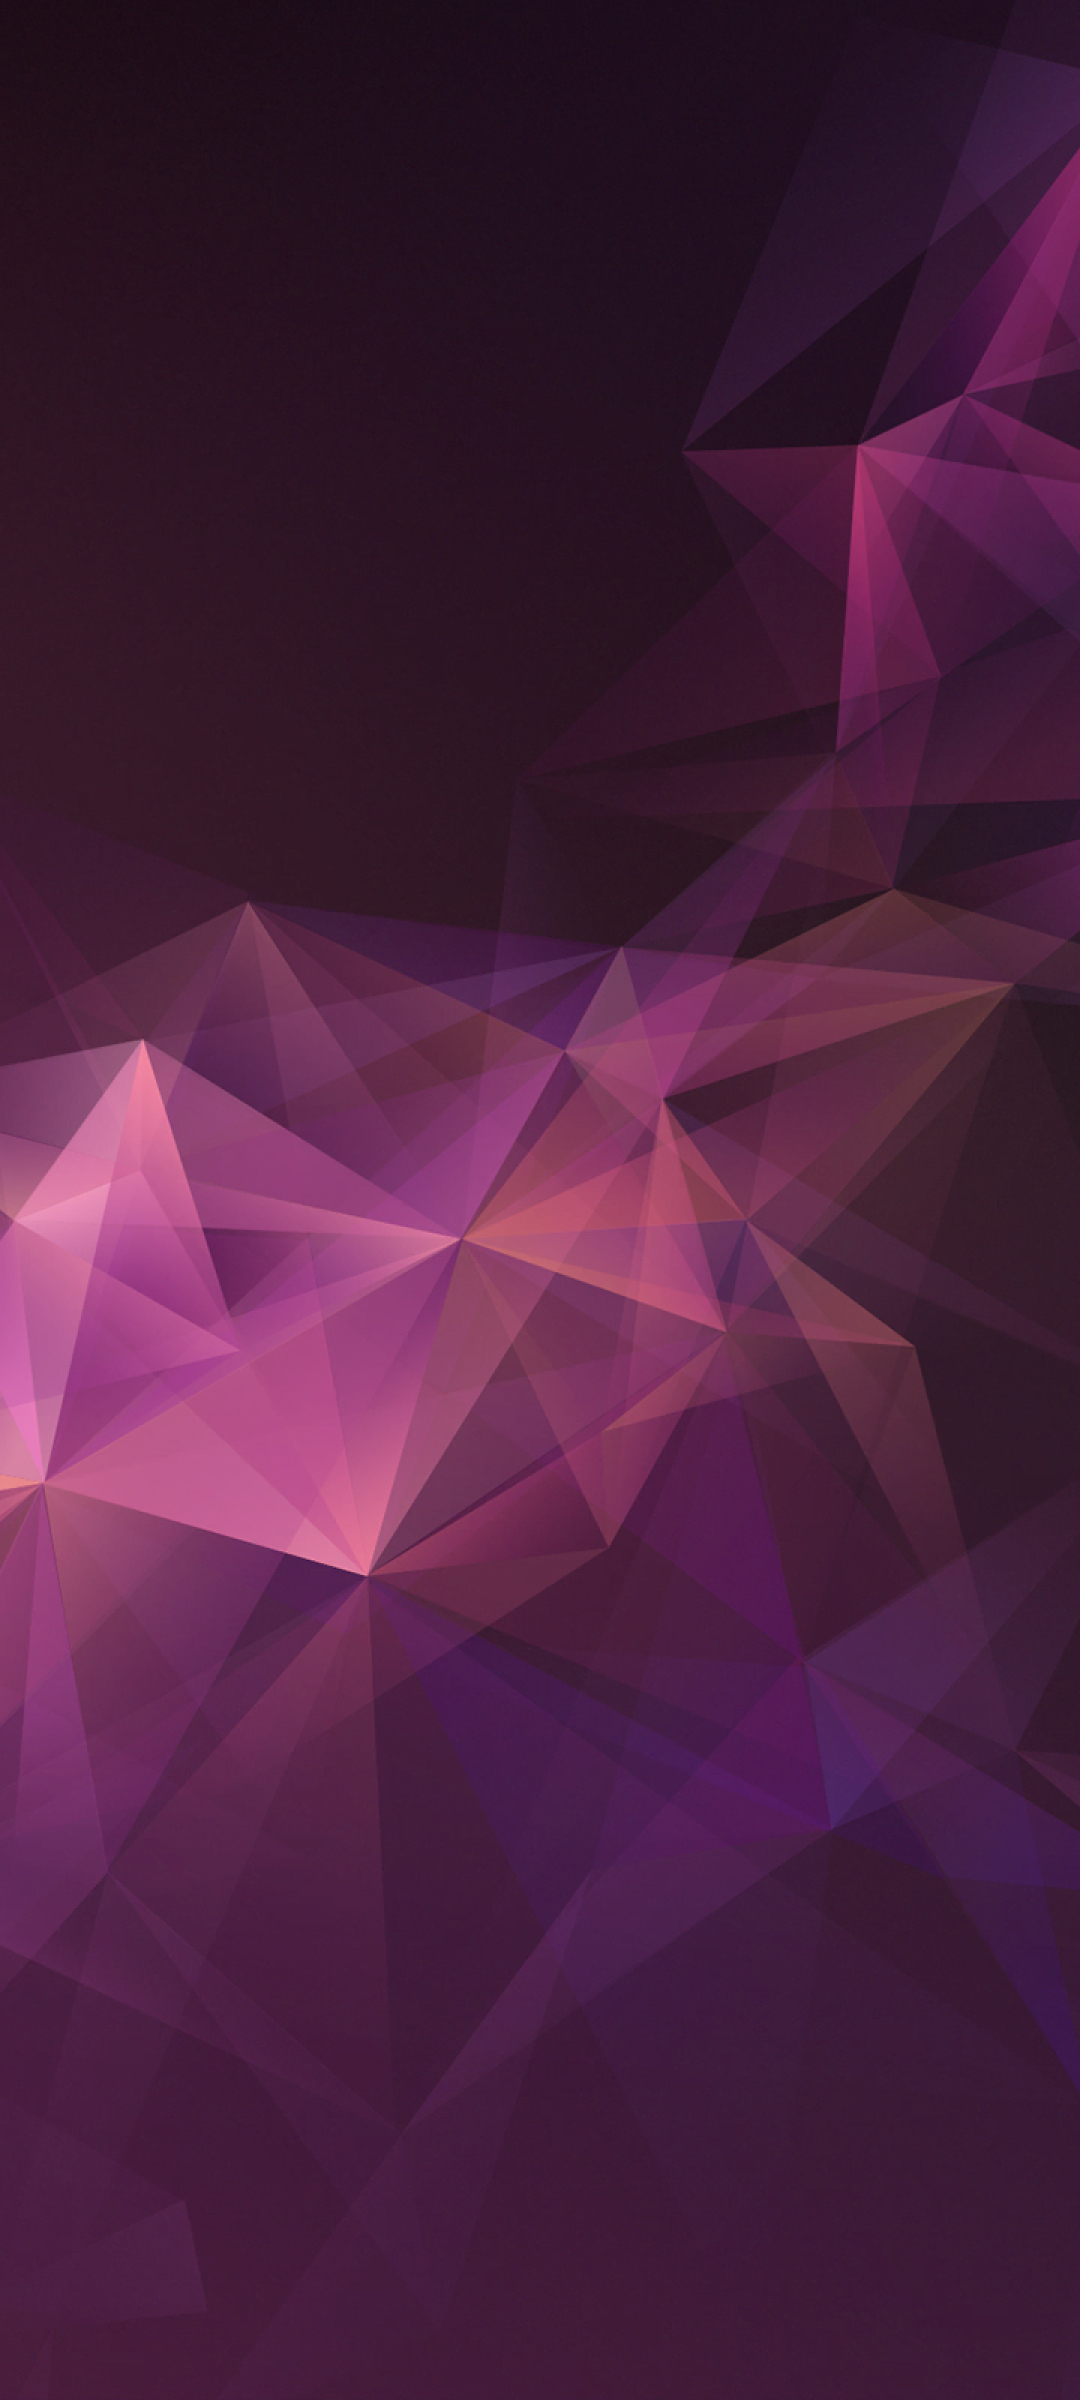 1080x2400 Pink Lowpoly Abstract Samsung Galaxy S9 Stock 1080x2400 Resolution Wallpaper Hd Abstract 4k Wallpapers Images Photos And Background Wallpapers Den